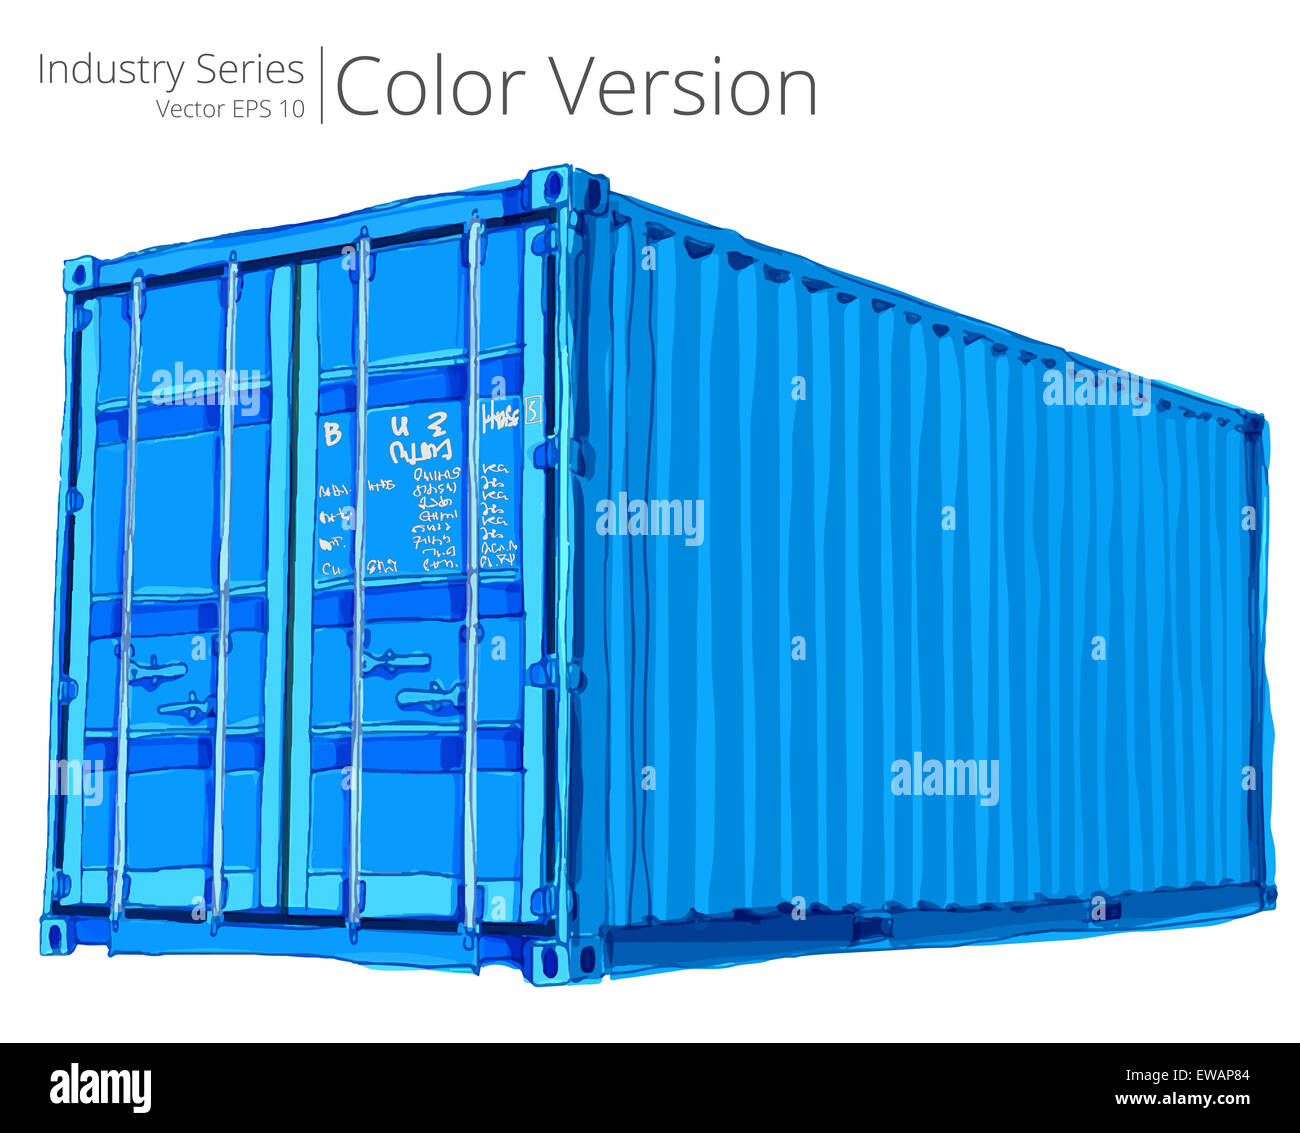 Vector illustration of Cargo container, Color Series. Stock Photo